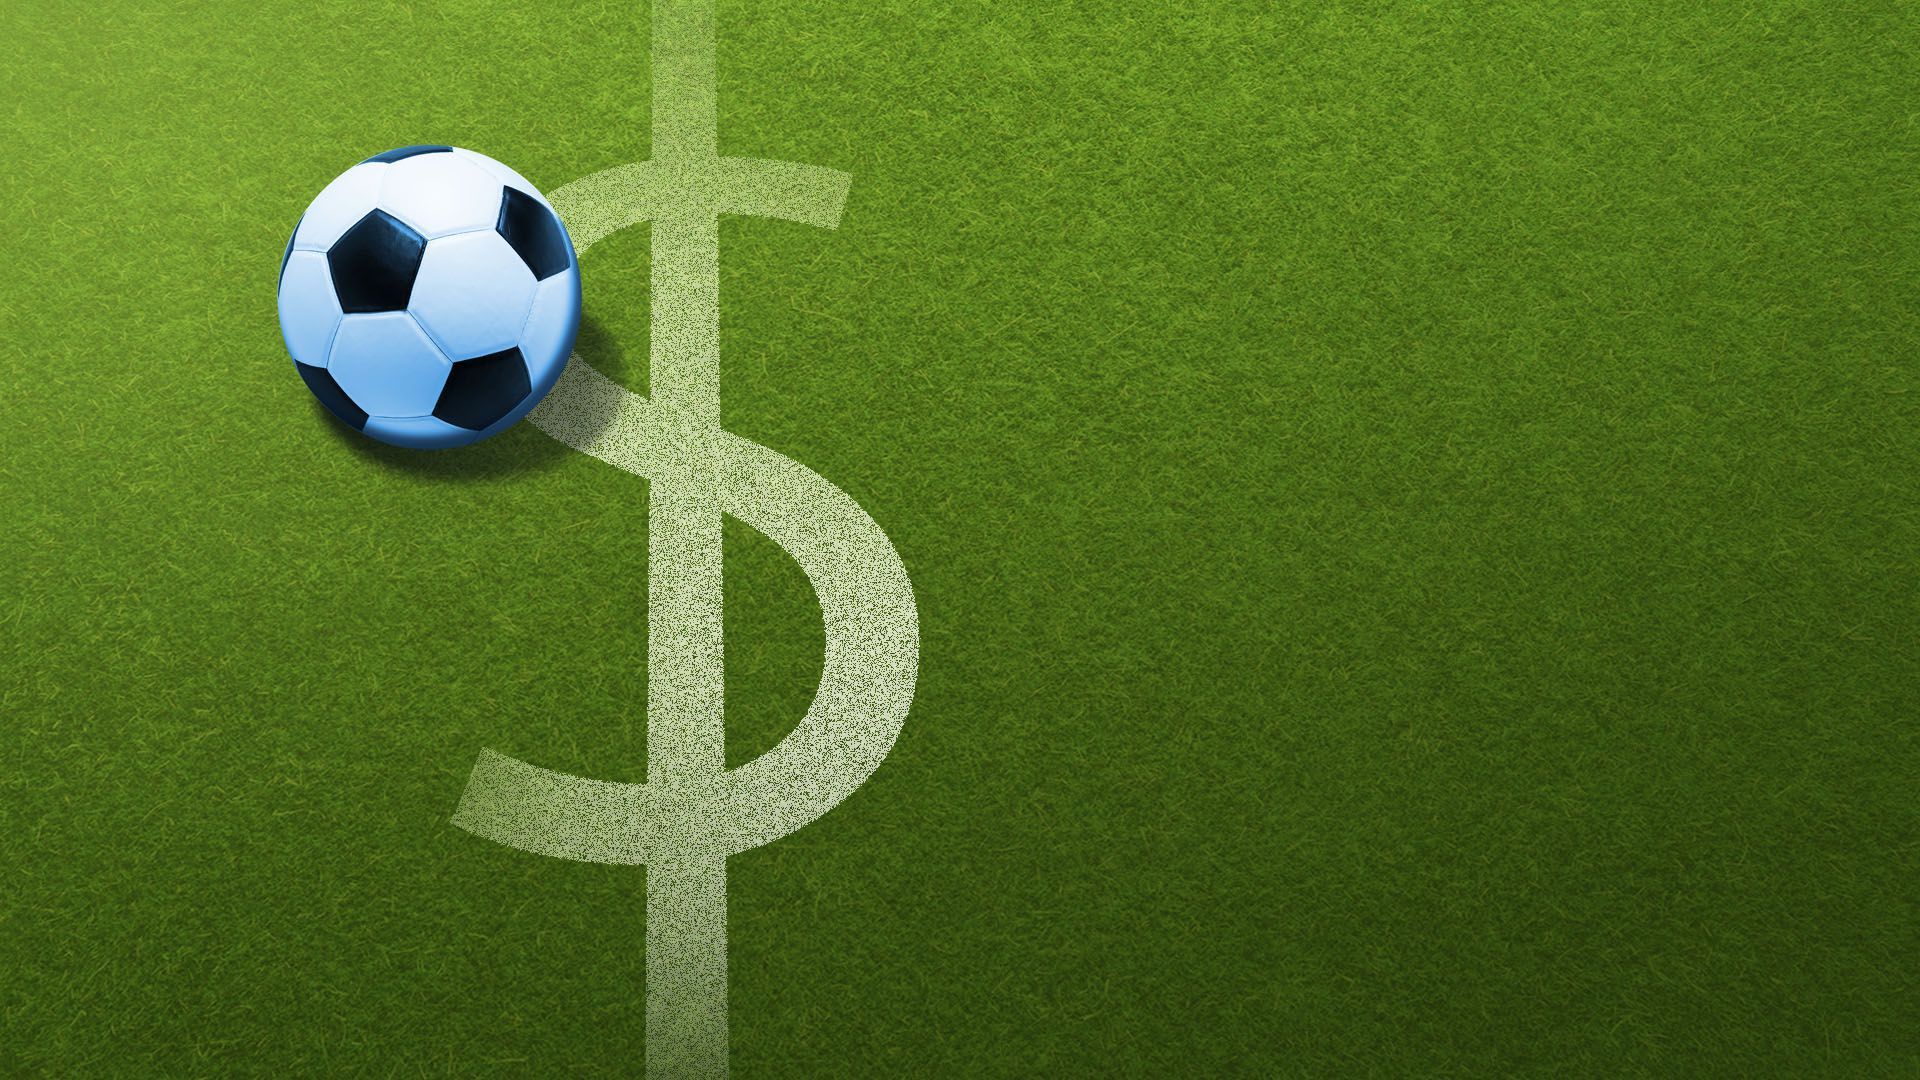 Illustration of a soccer ball on a soccer pitch with a dollar sign lines